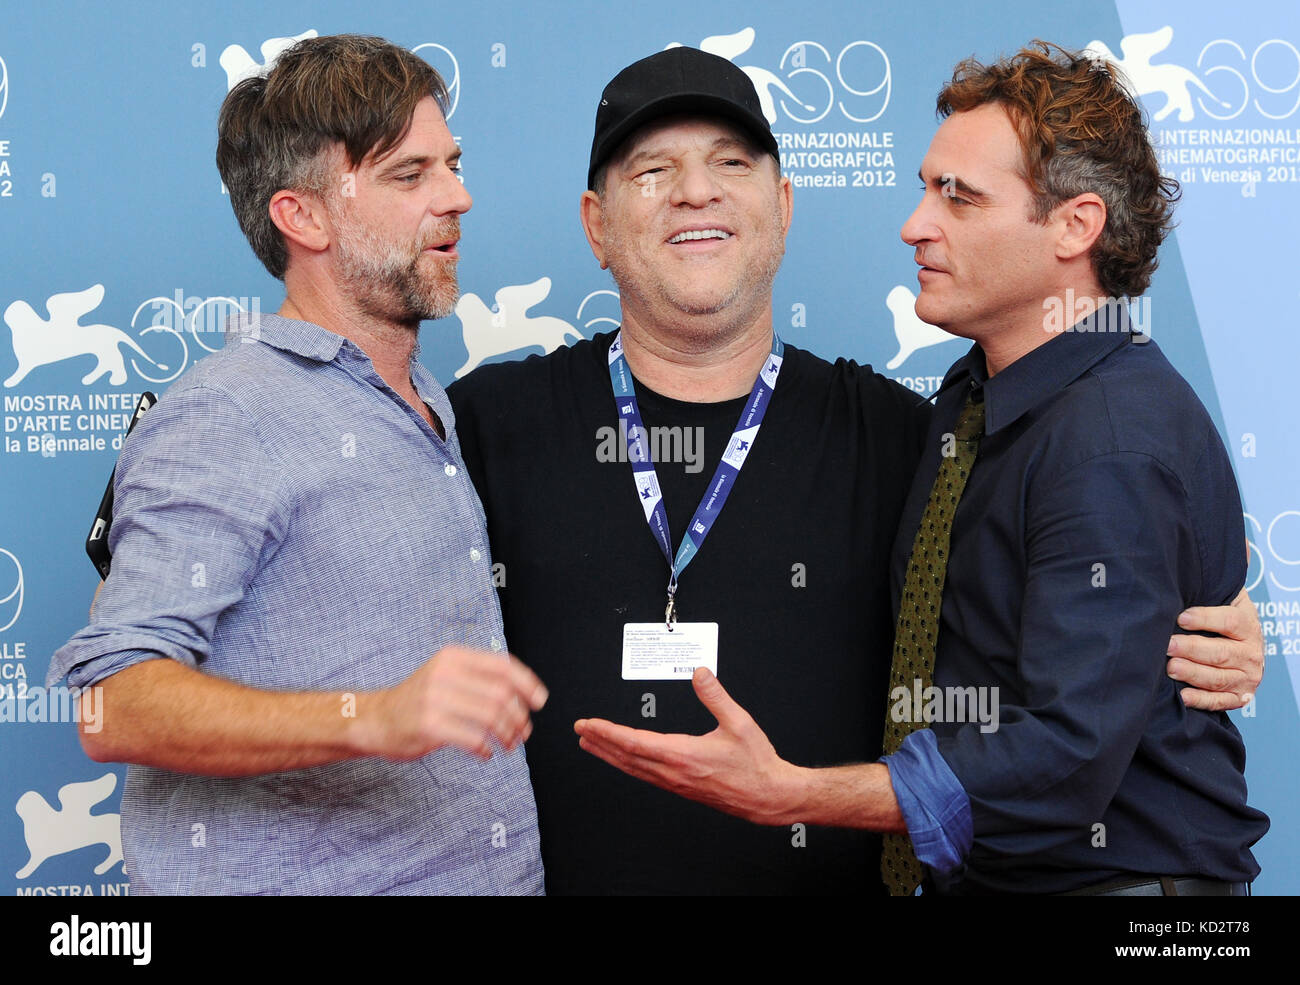 Venice, Italy. 01st Sep, 2012. US director Paul Thomas Anderson (L-R), US film producer Harvey Weinstein and US actor Joaquin Phoenix pose during a photocall of the movie 'The Master' during the 69th Venice International Film Festival in Venice, Italy, 01 September 2012. The movie is presented in the official competition 'Venezia 69' of the festival, which runs from 29 August to 08 September. Credit: Jens Kalaene dpa | usage worldwide/dpa/Alamy Live News Stock Photo